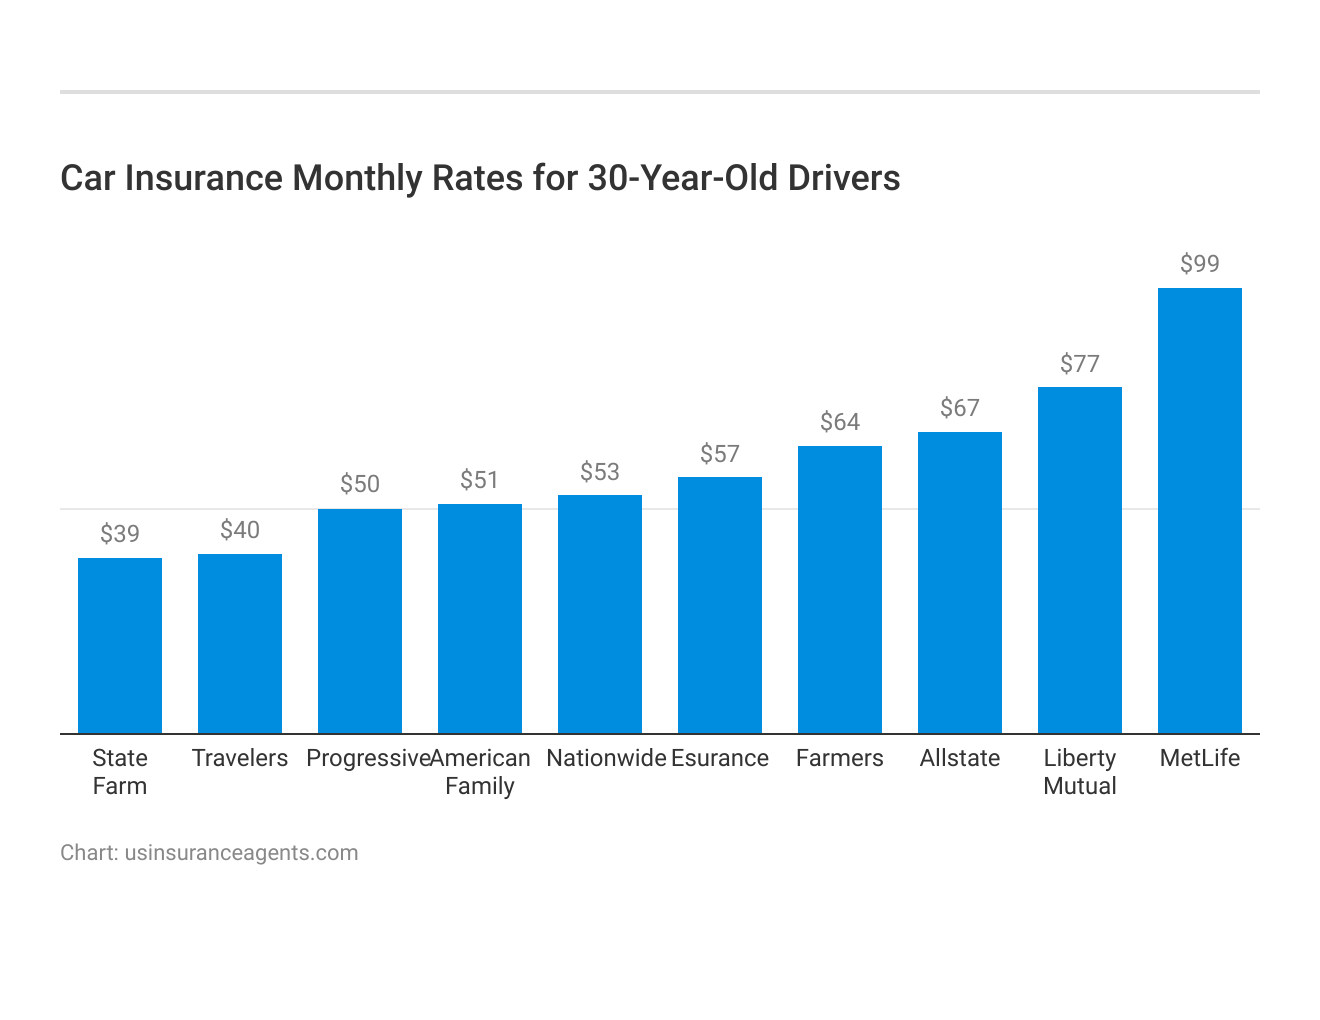 <h3>Car Insurance Monthly Rates for 30-Year-Old Drivers</h3>